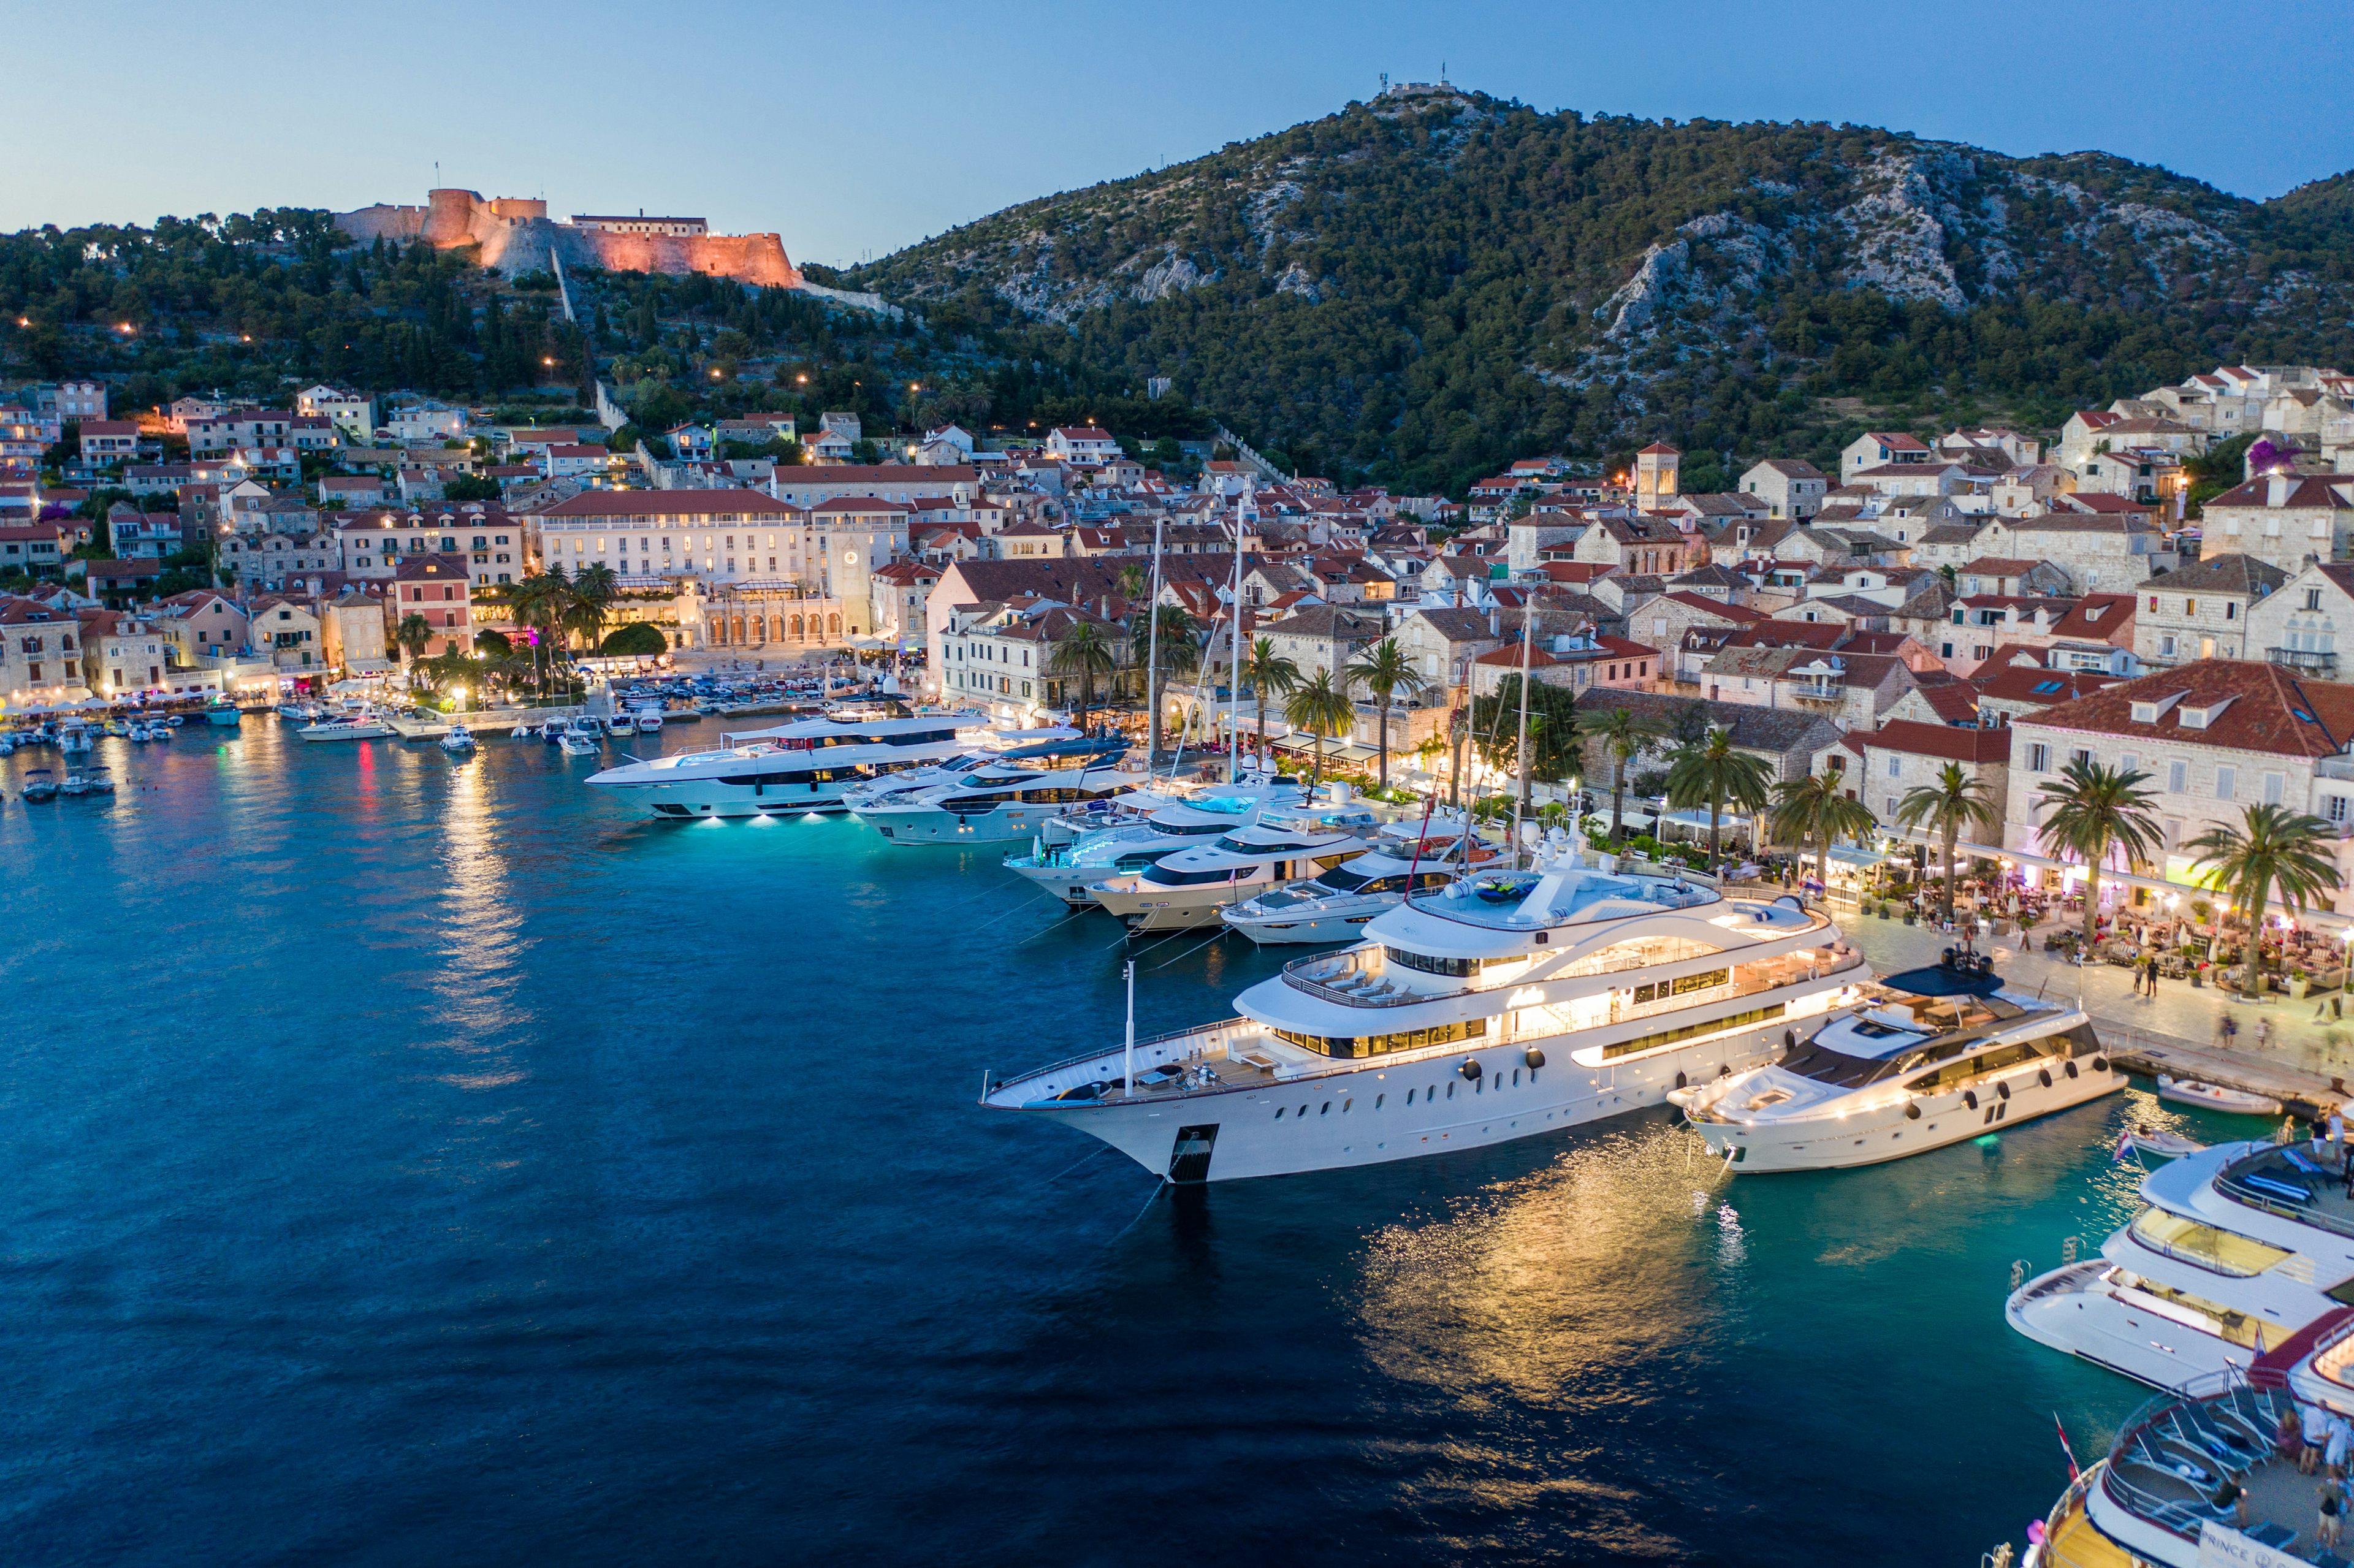 The waterfront of Hvar Town bustling with restaurants and super yachts